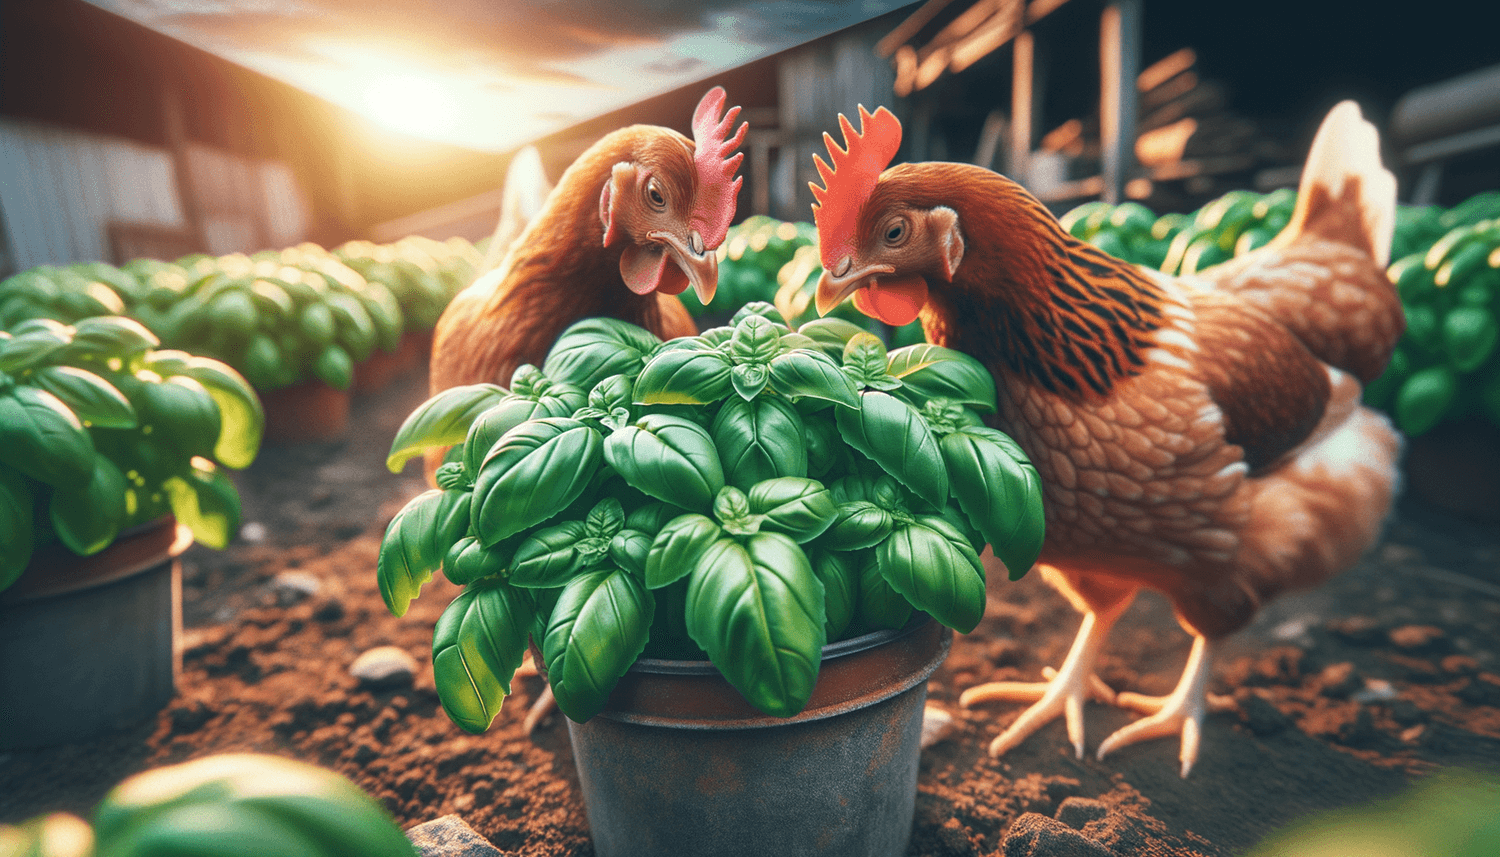 Can Chickens Eat Basil?